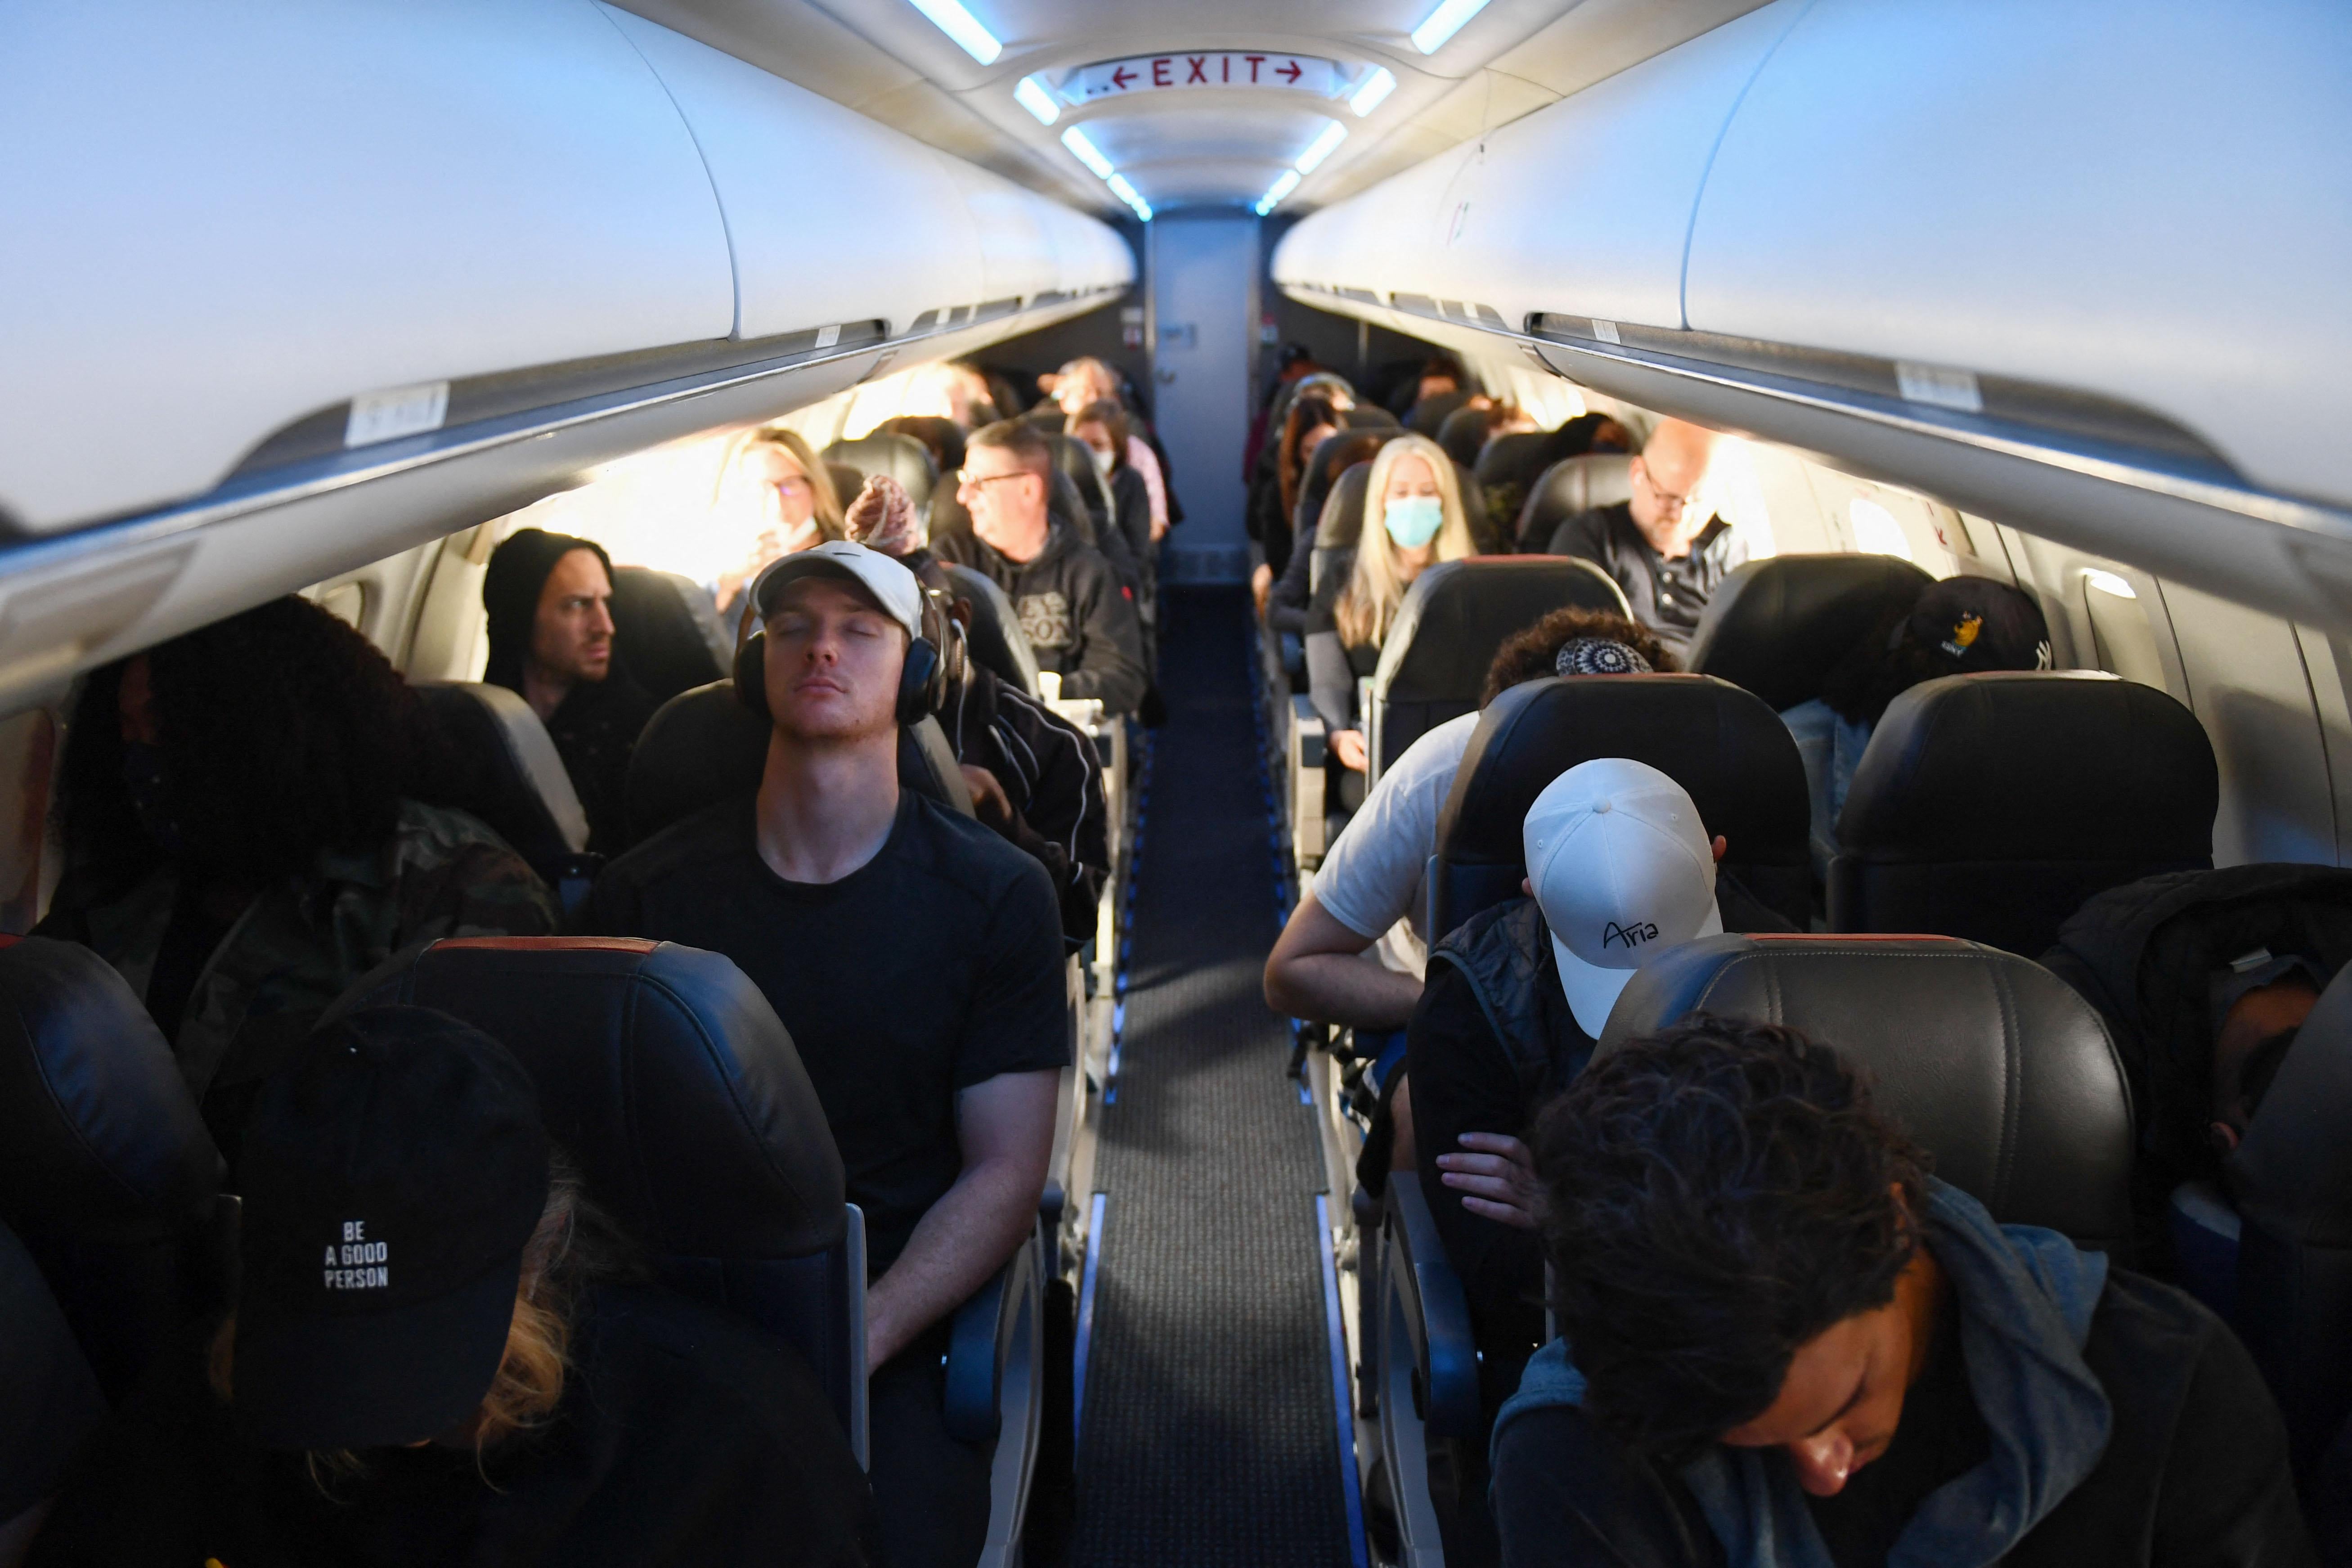 A mix of passengers wearing masks and not wearing masks in the cabin of an airplane.